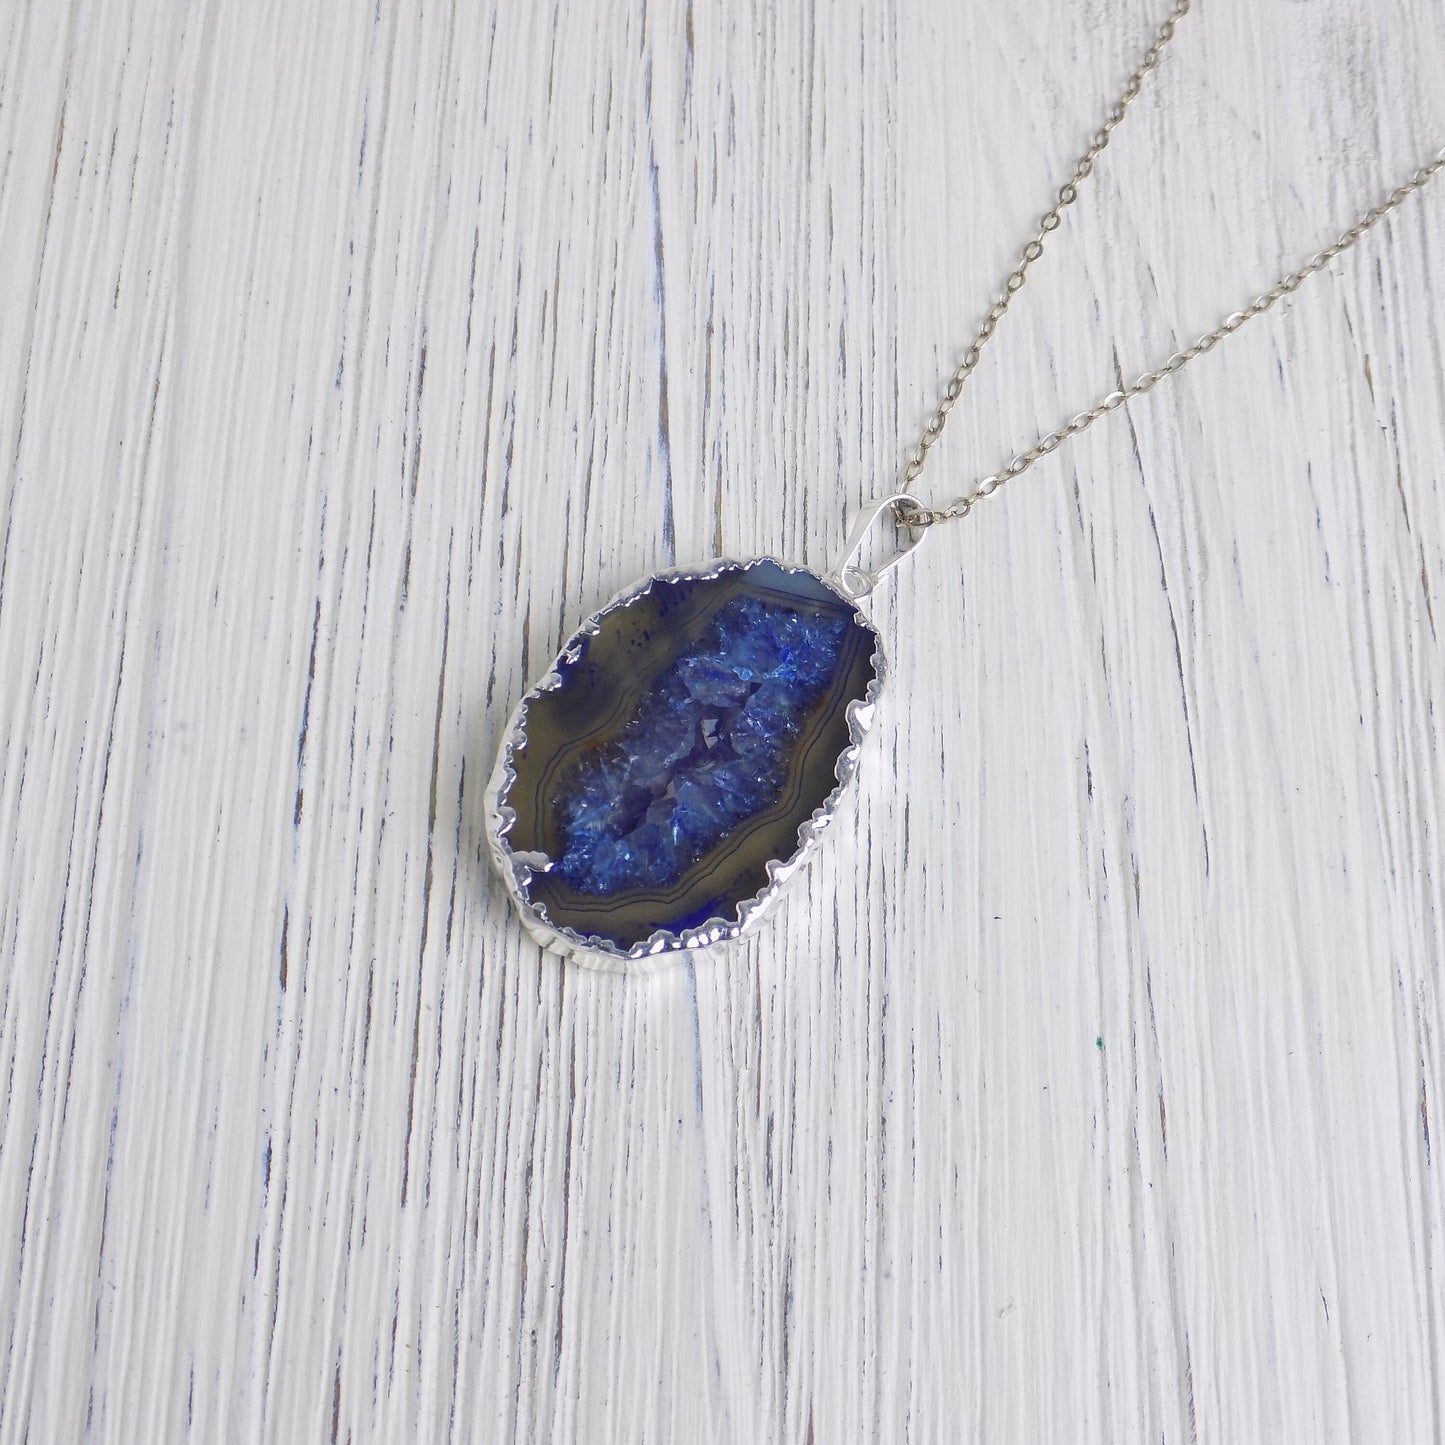 Small Geode Necklace Blue, Raw Stone Necklace Druzy, Boho Crystal Pendants Silver Chain, Christmas Gift Women, G14-270